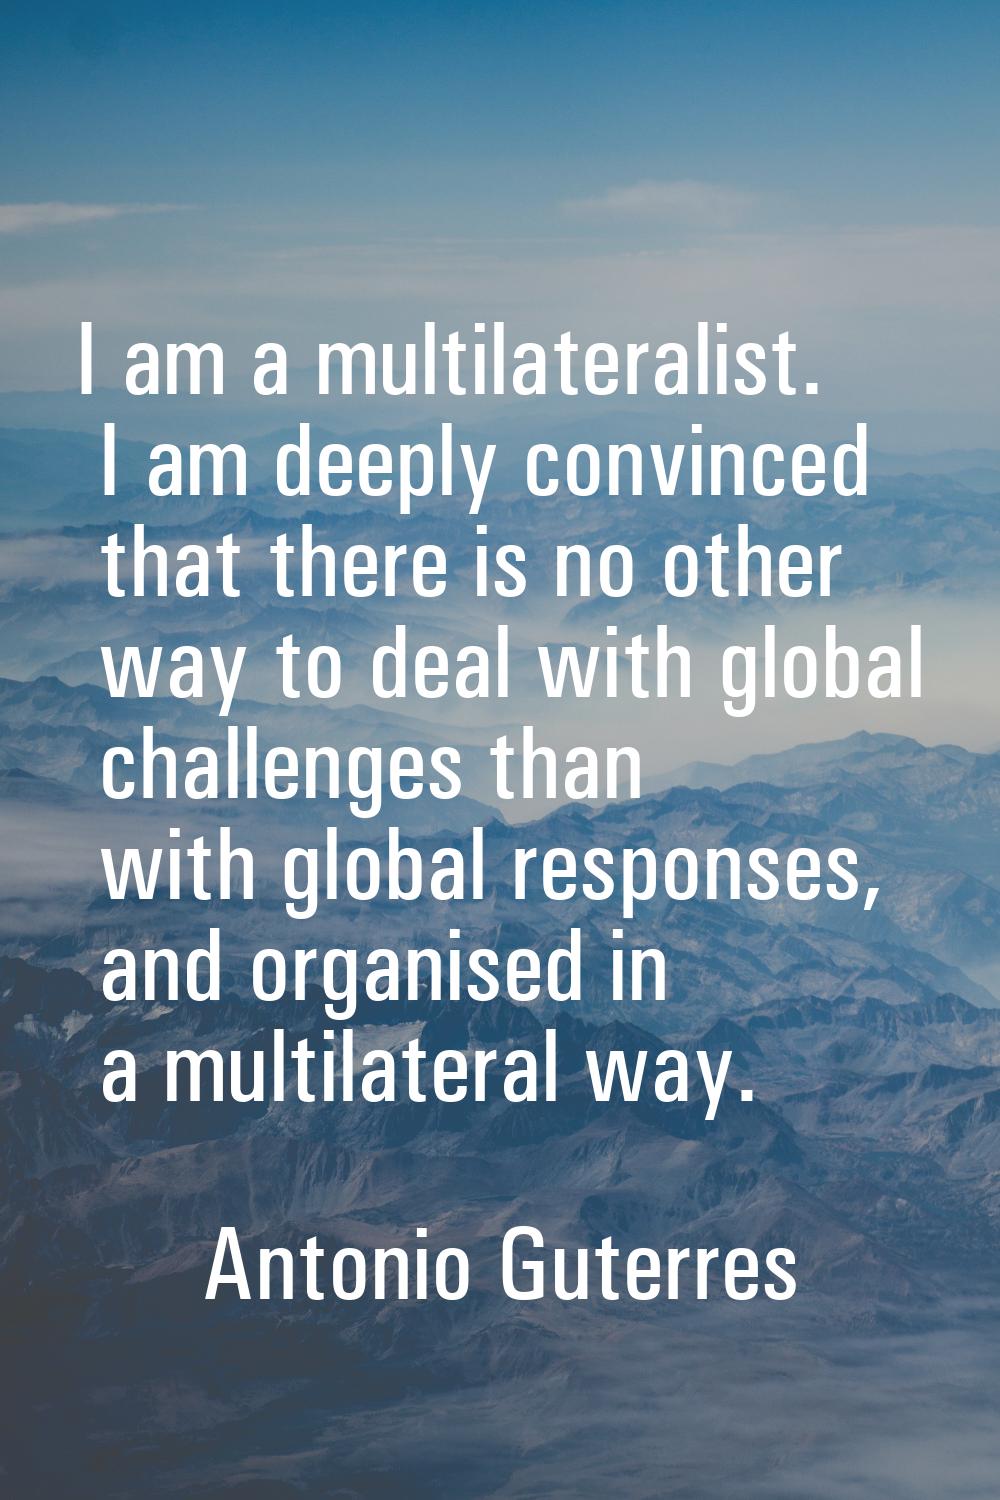 I am a multilateralist. I am deeply convinced that there is no other way to deal with global challe